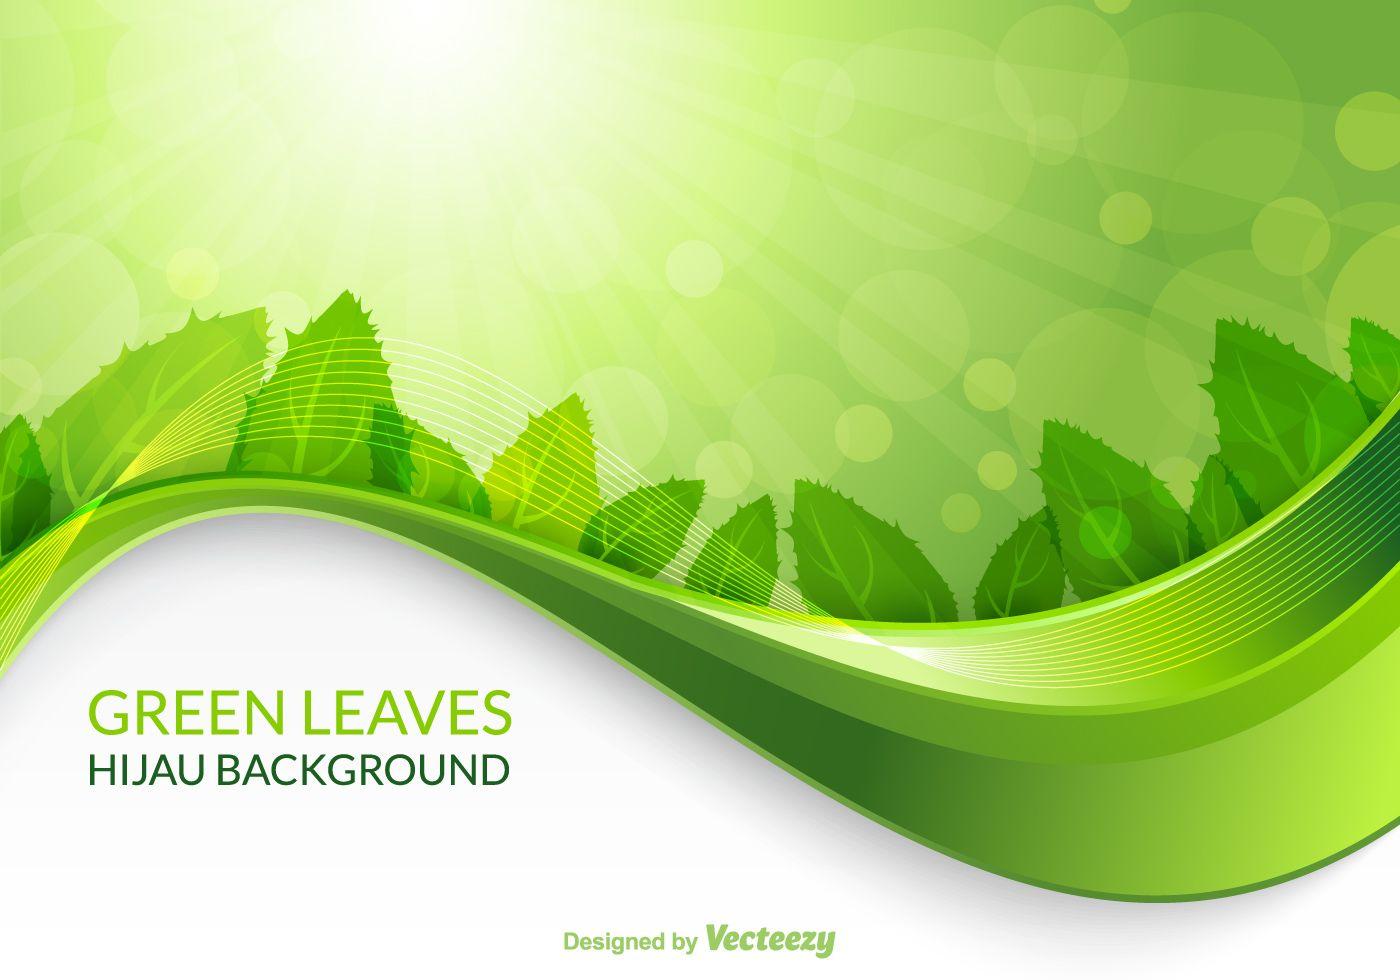 Green Background Free Vector Art - (45232 Free Downloads)